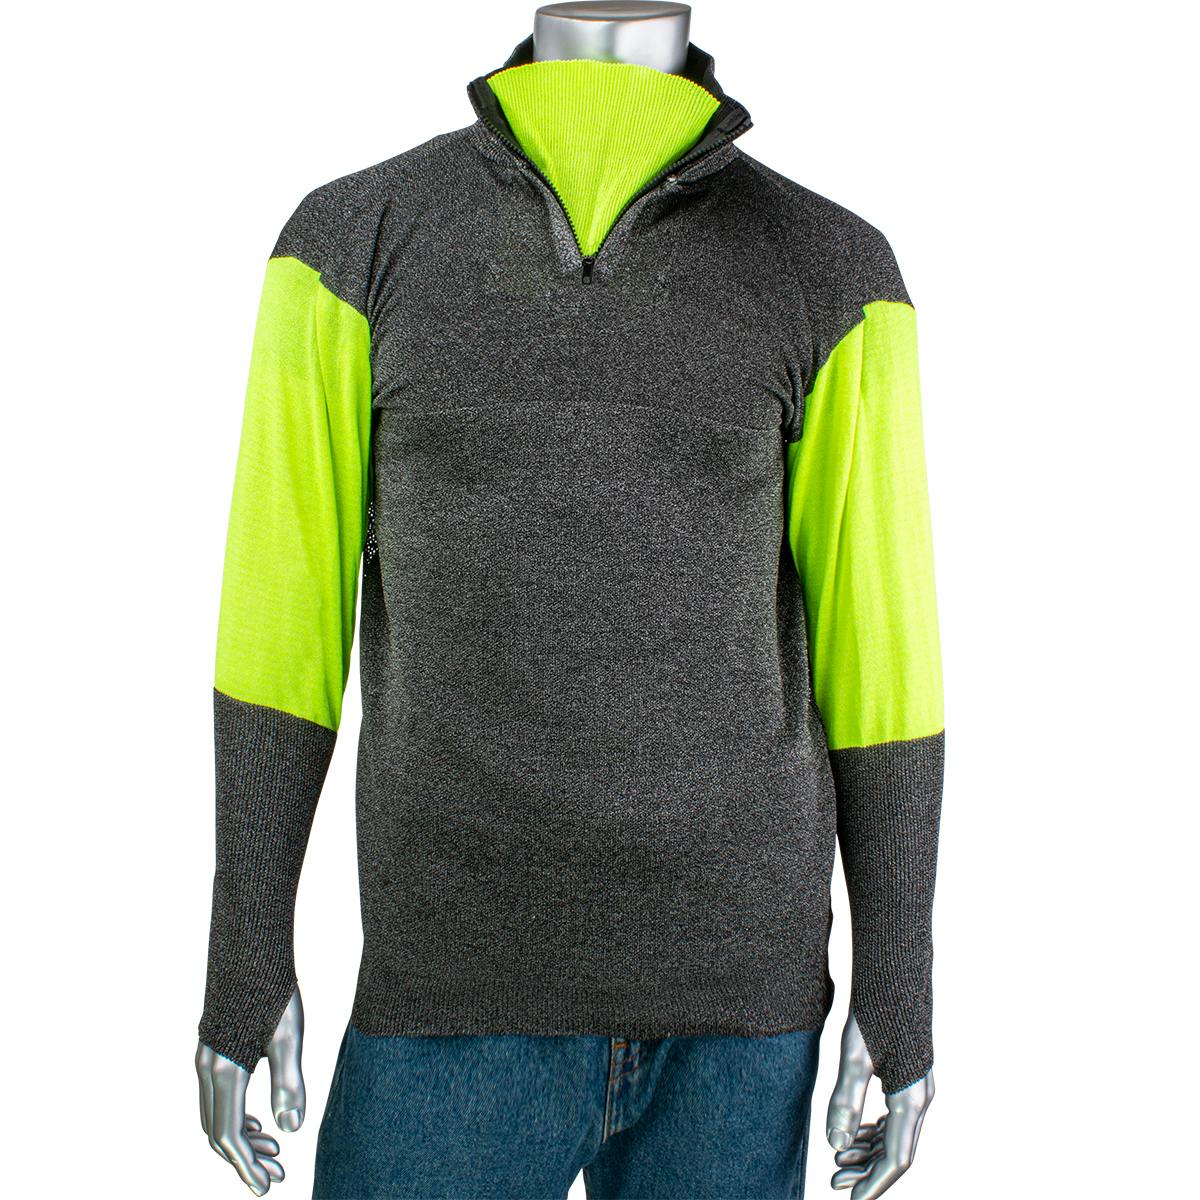 ATA® Blended Cut Resistant 1/4 Zip Pullover with Hi-Vis Sleeves and Thumb Holes, Dark Gray (PJG145-3CM-HVB-TH)_1